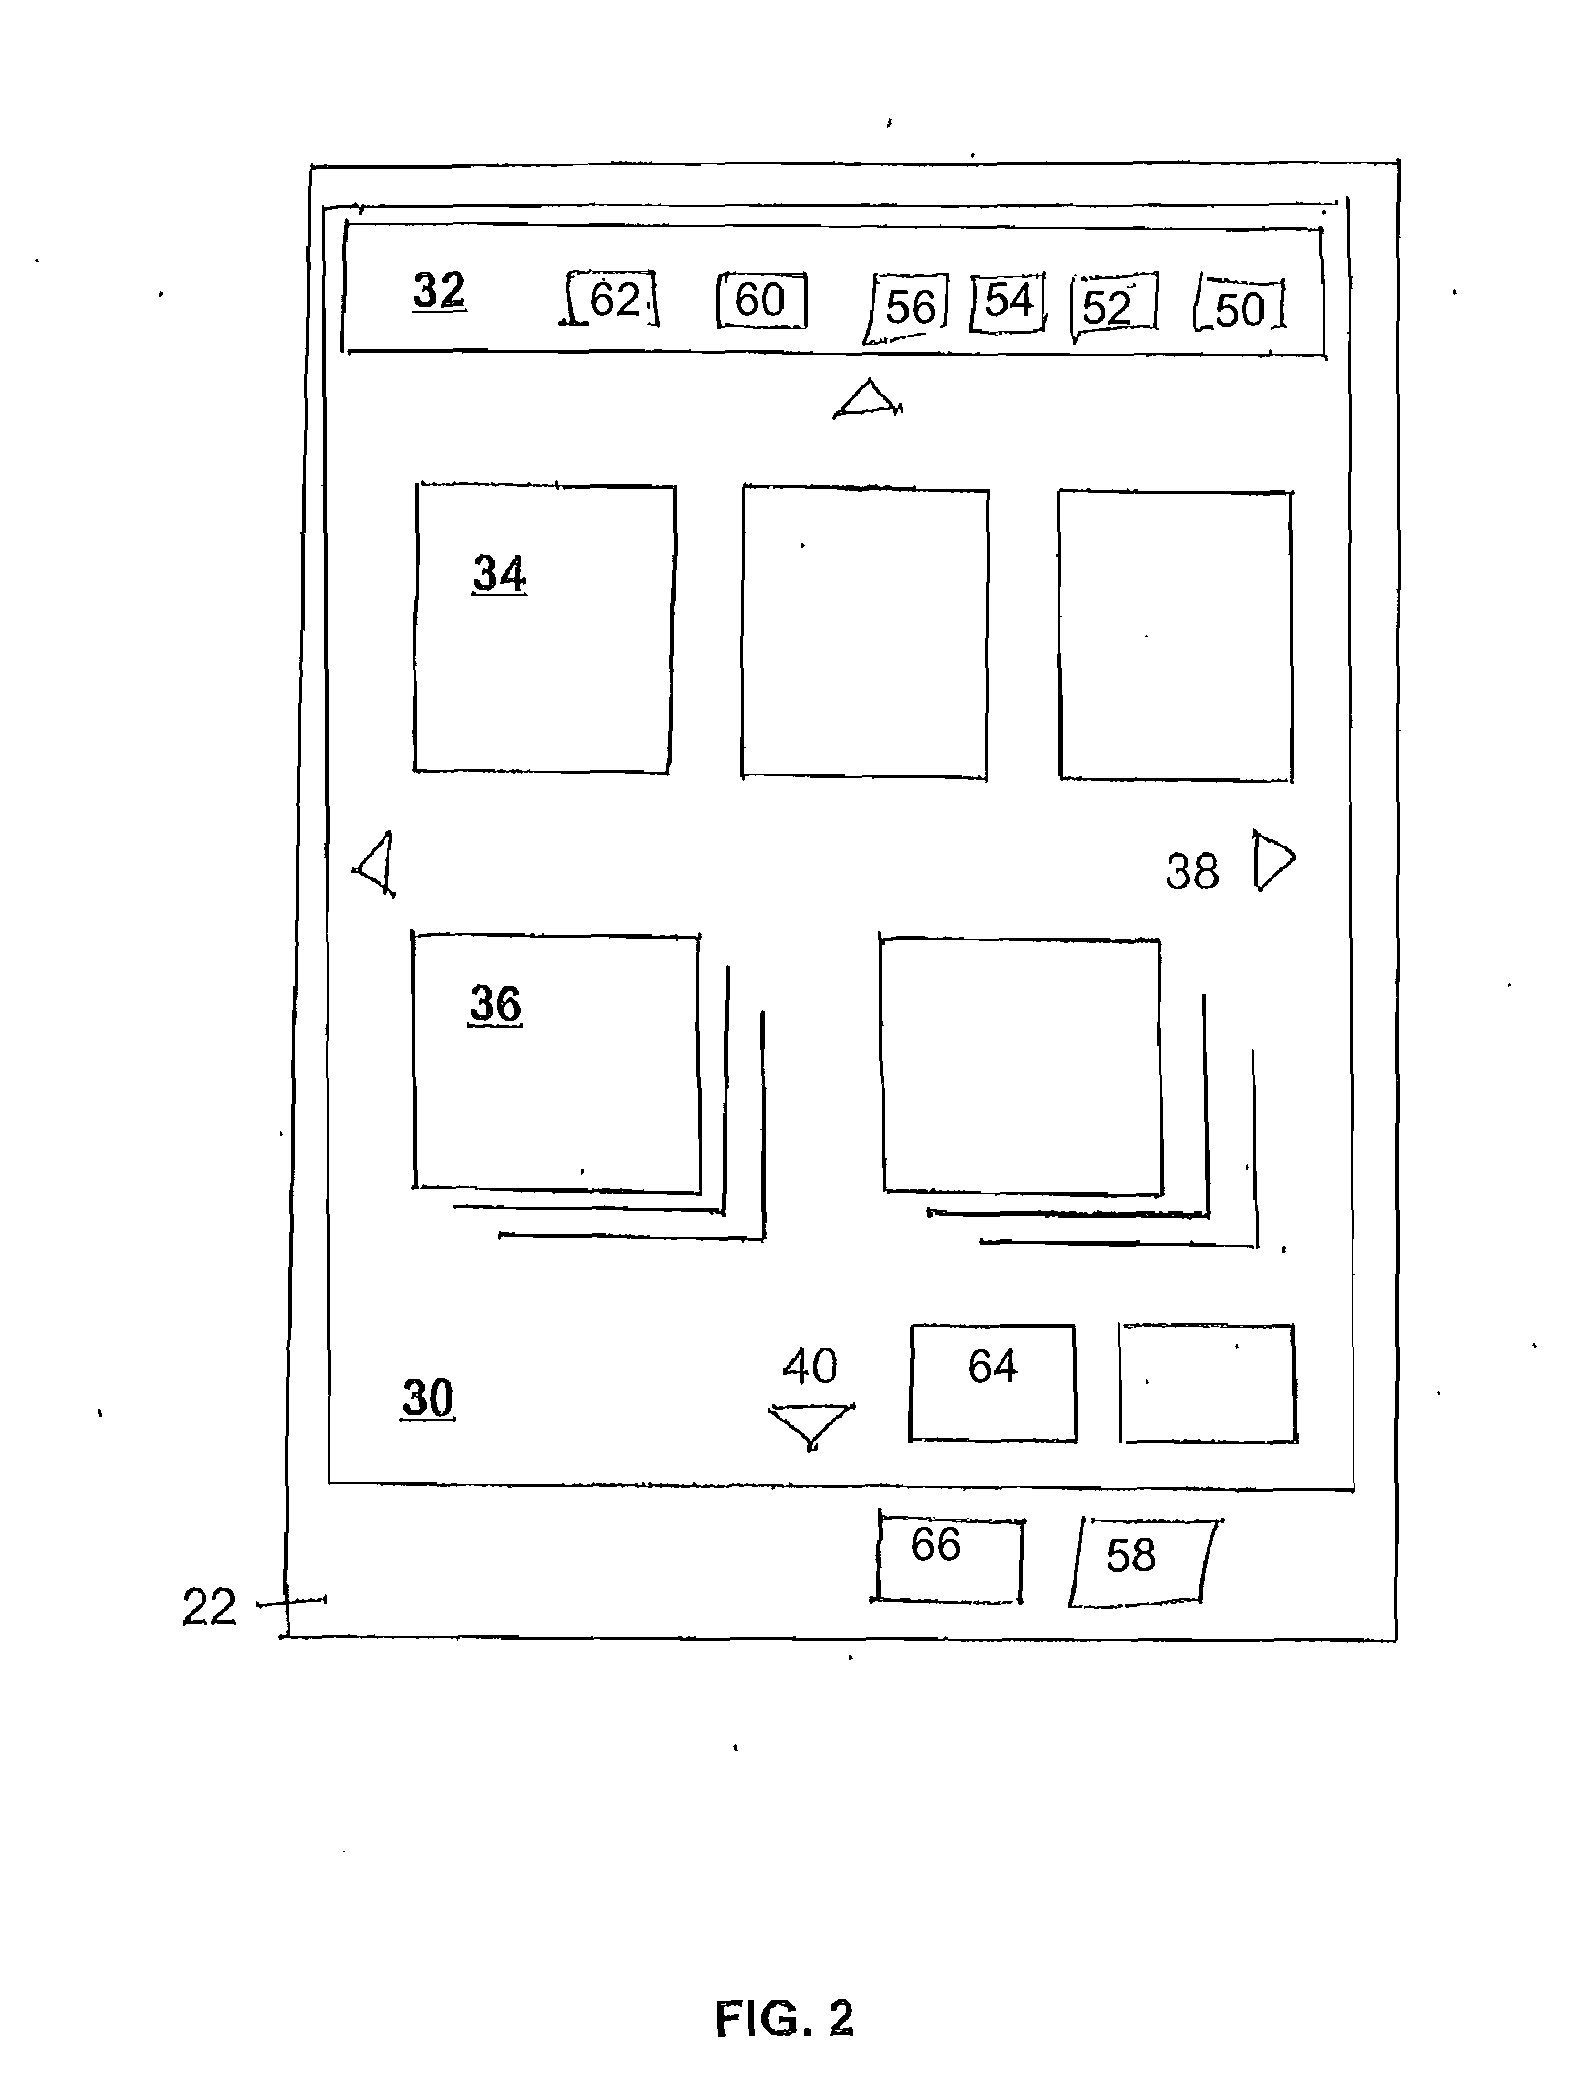 Interactive electronic catalog apparatus and method